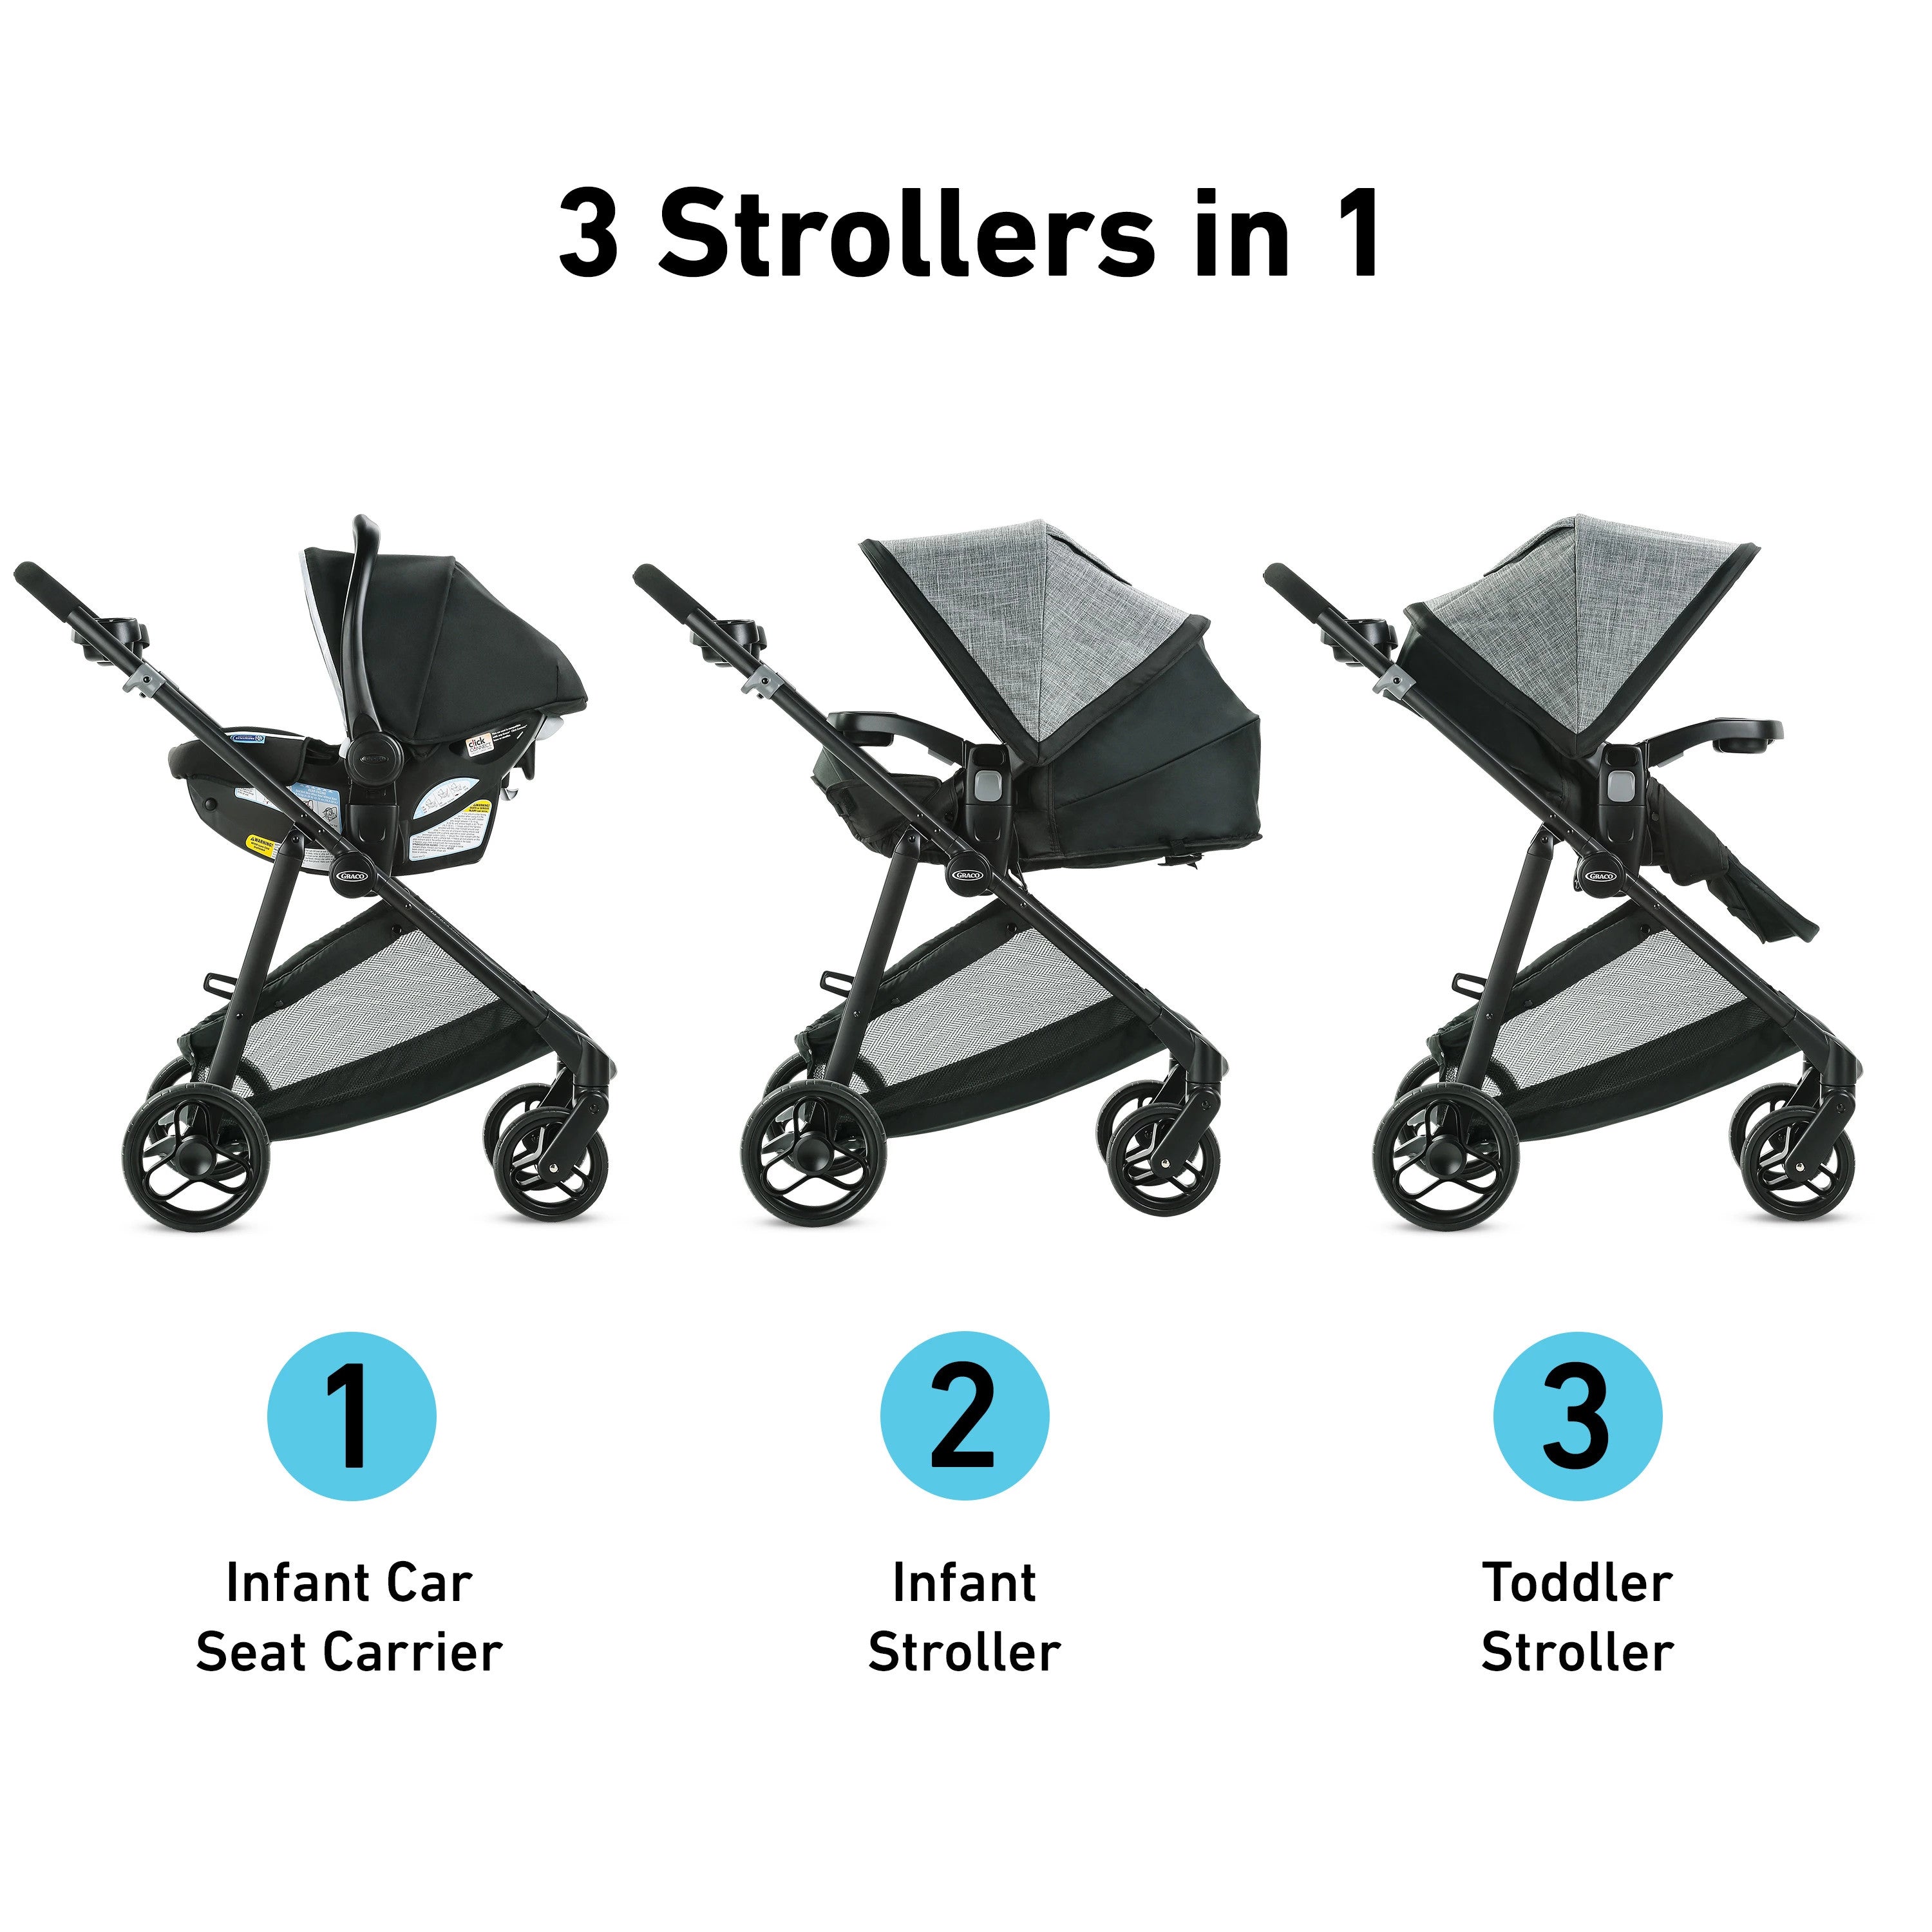 Modes Element Travel System - Canter